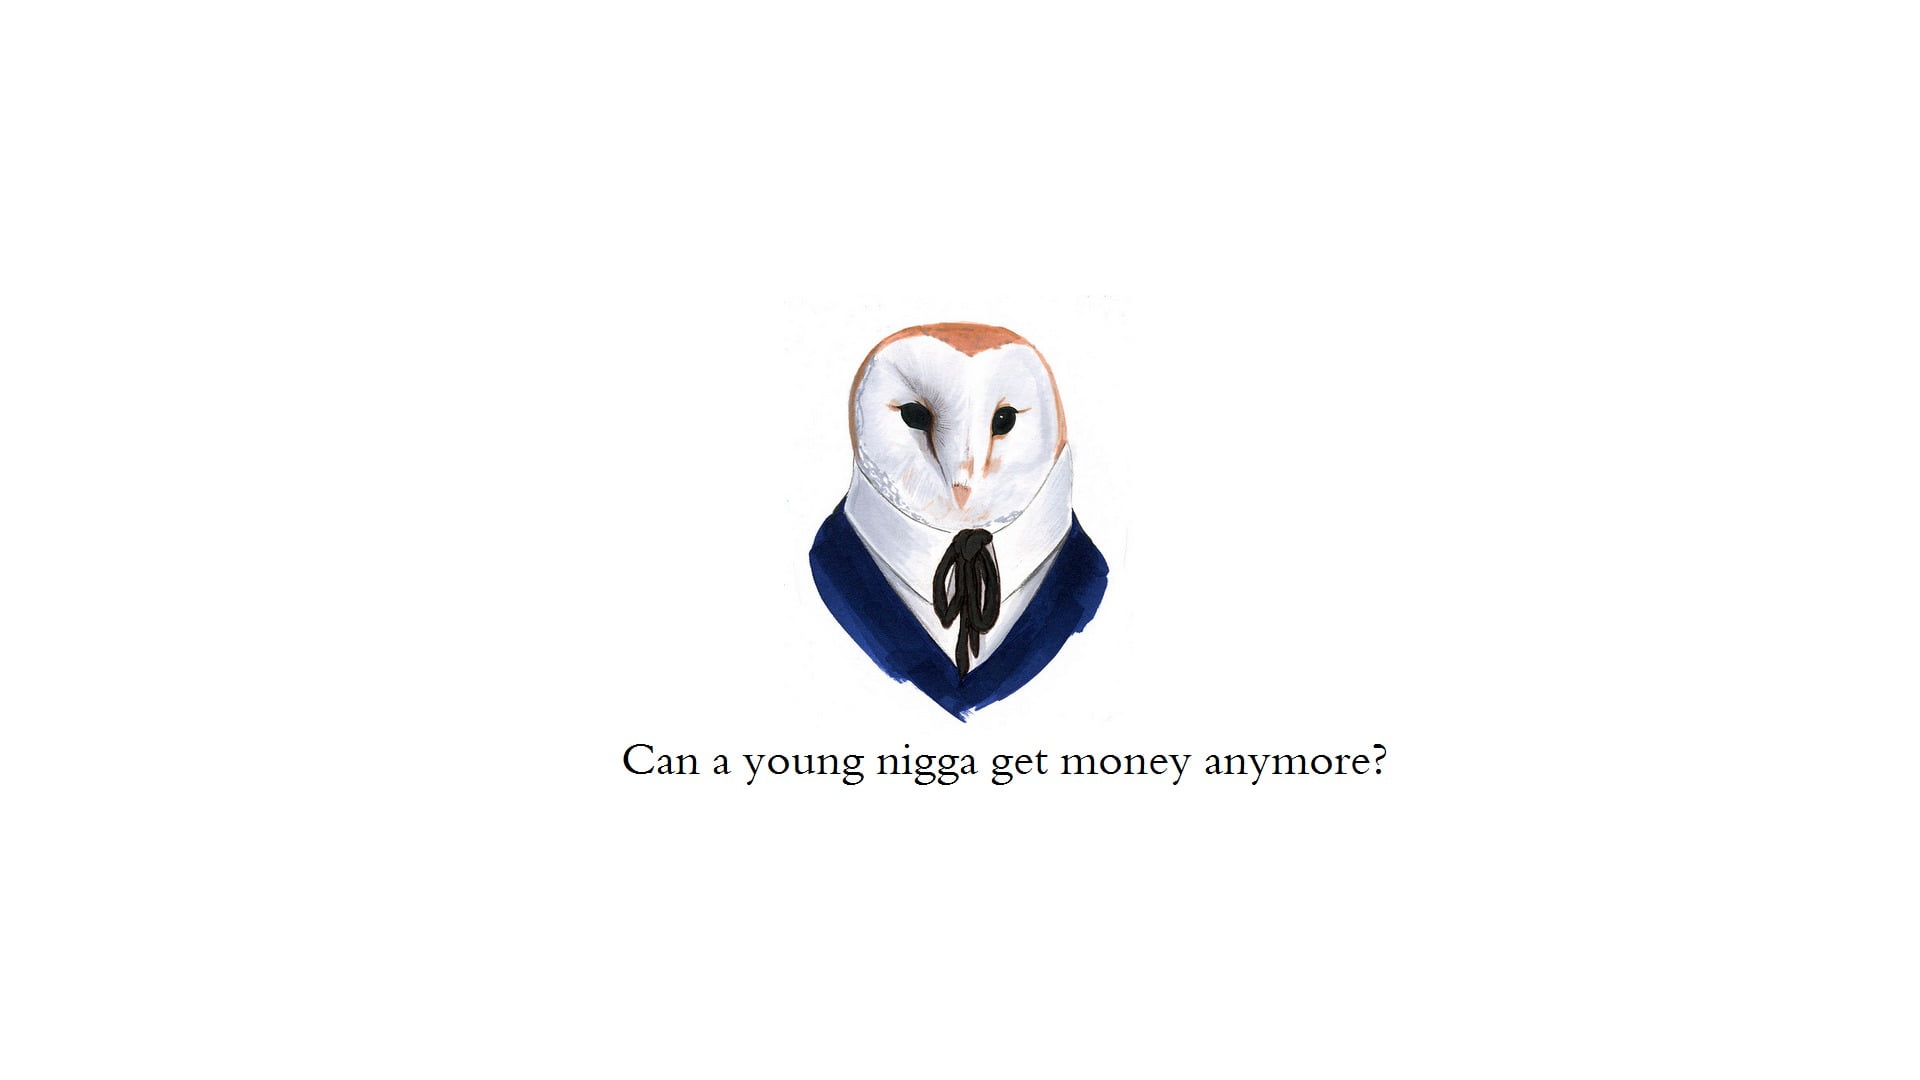 Can a Young nigga get money anymore ? owl meme, minimalism, simple background